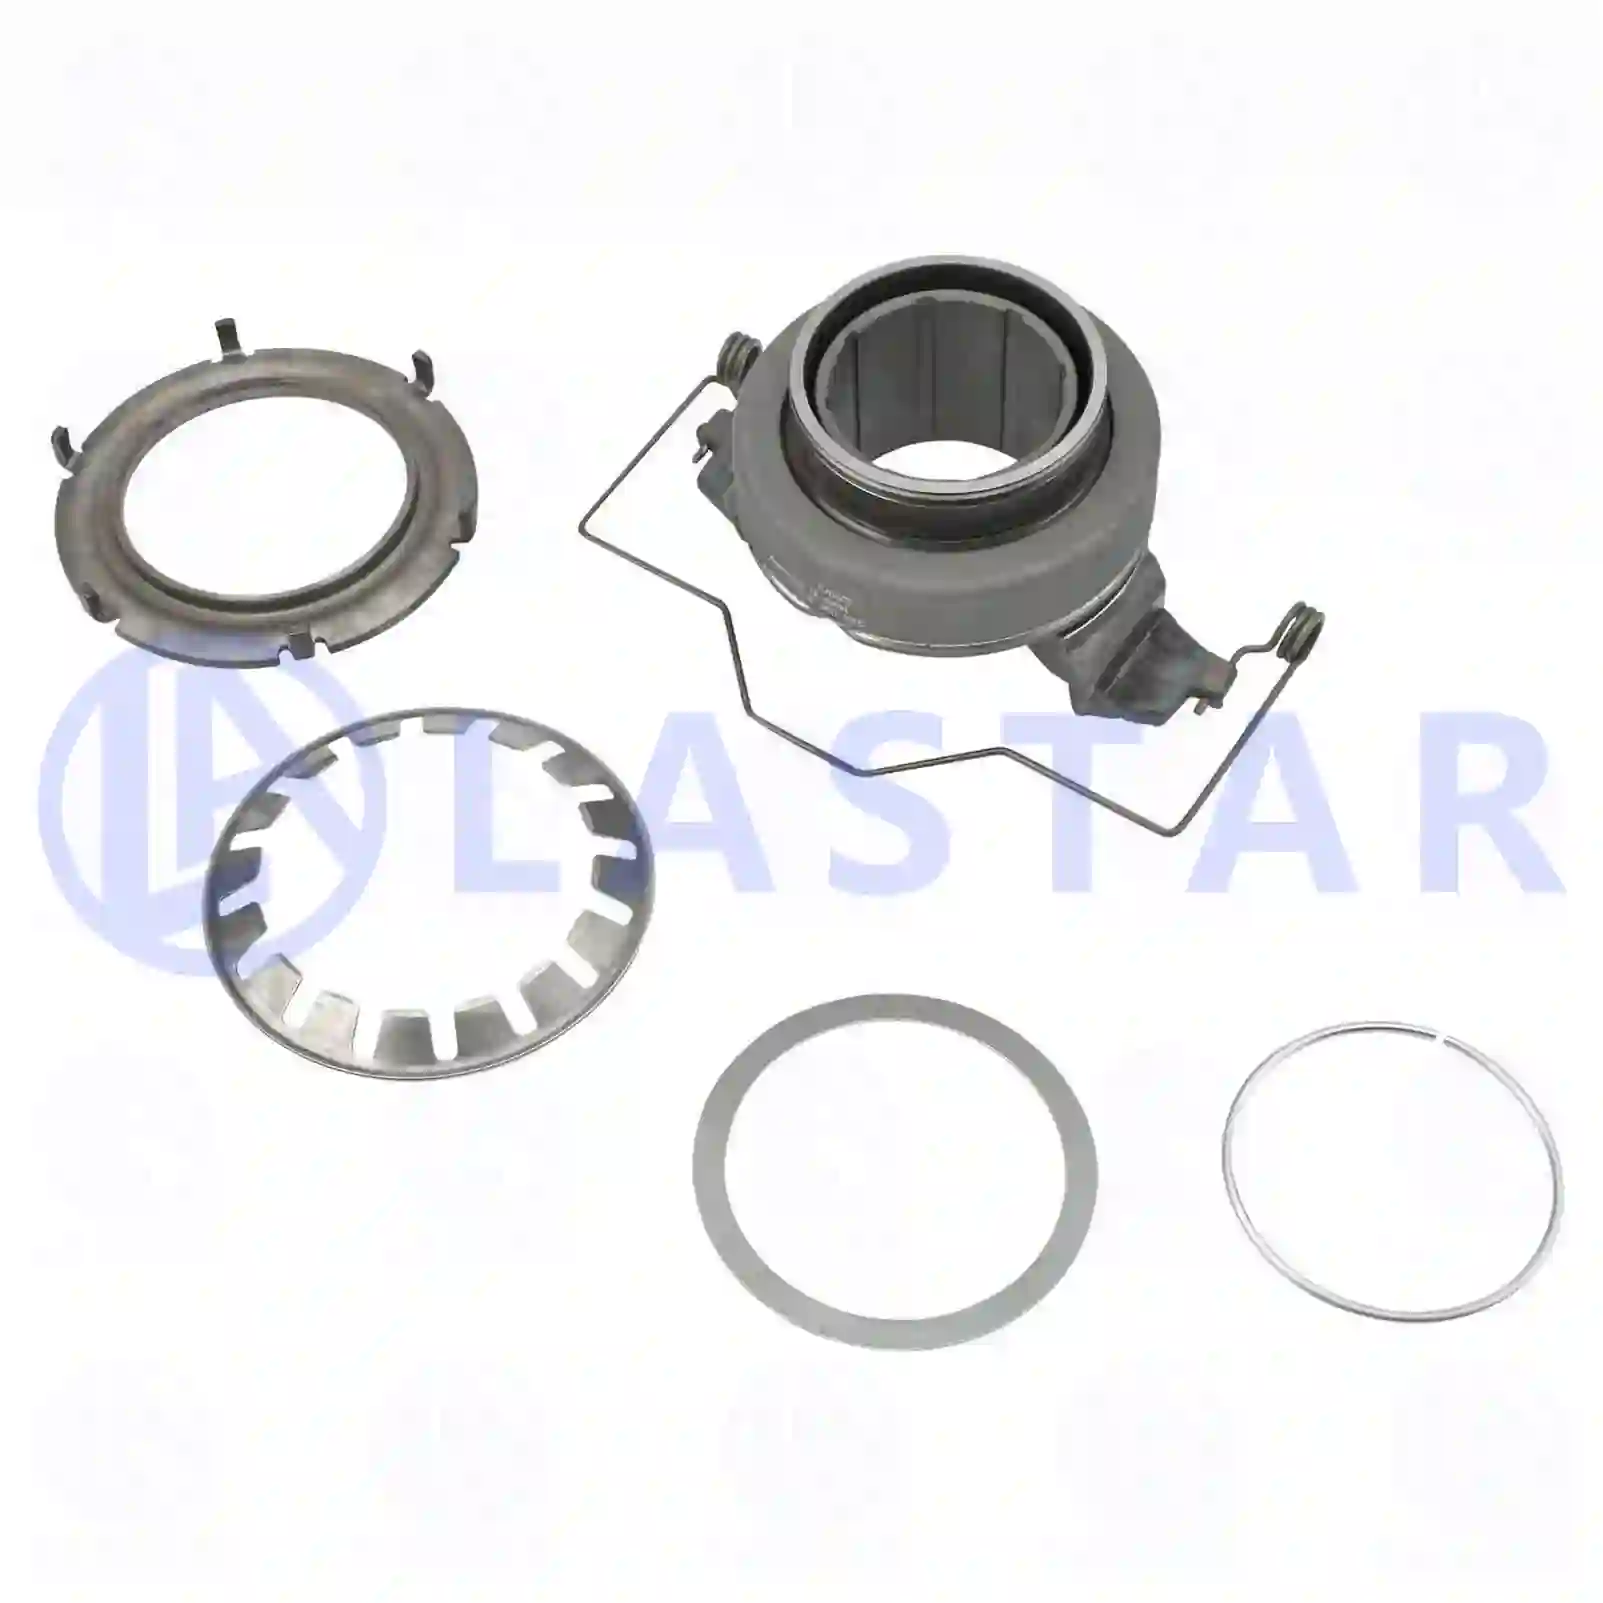 Release bearing, 77722252, 1521722, 20569153, 3192216 ||  77722252 Lastar Spare Part | Truck Spare Parts, Auotomotive Spare Parts Release bearing, 77722252, 1521722, 20569153, 3192216 ||  77722252 Lastar Spare Part | Truck Spare Parts, Auotomotive Spare Parts